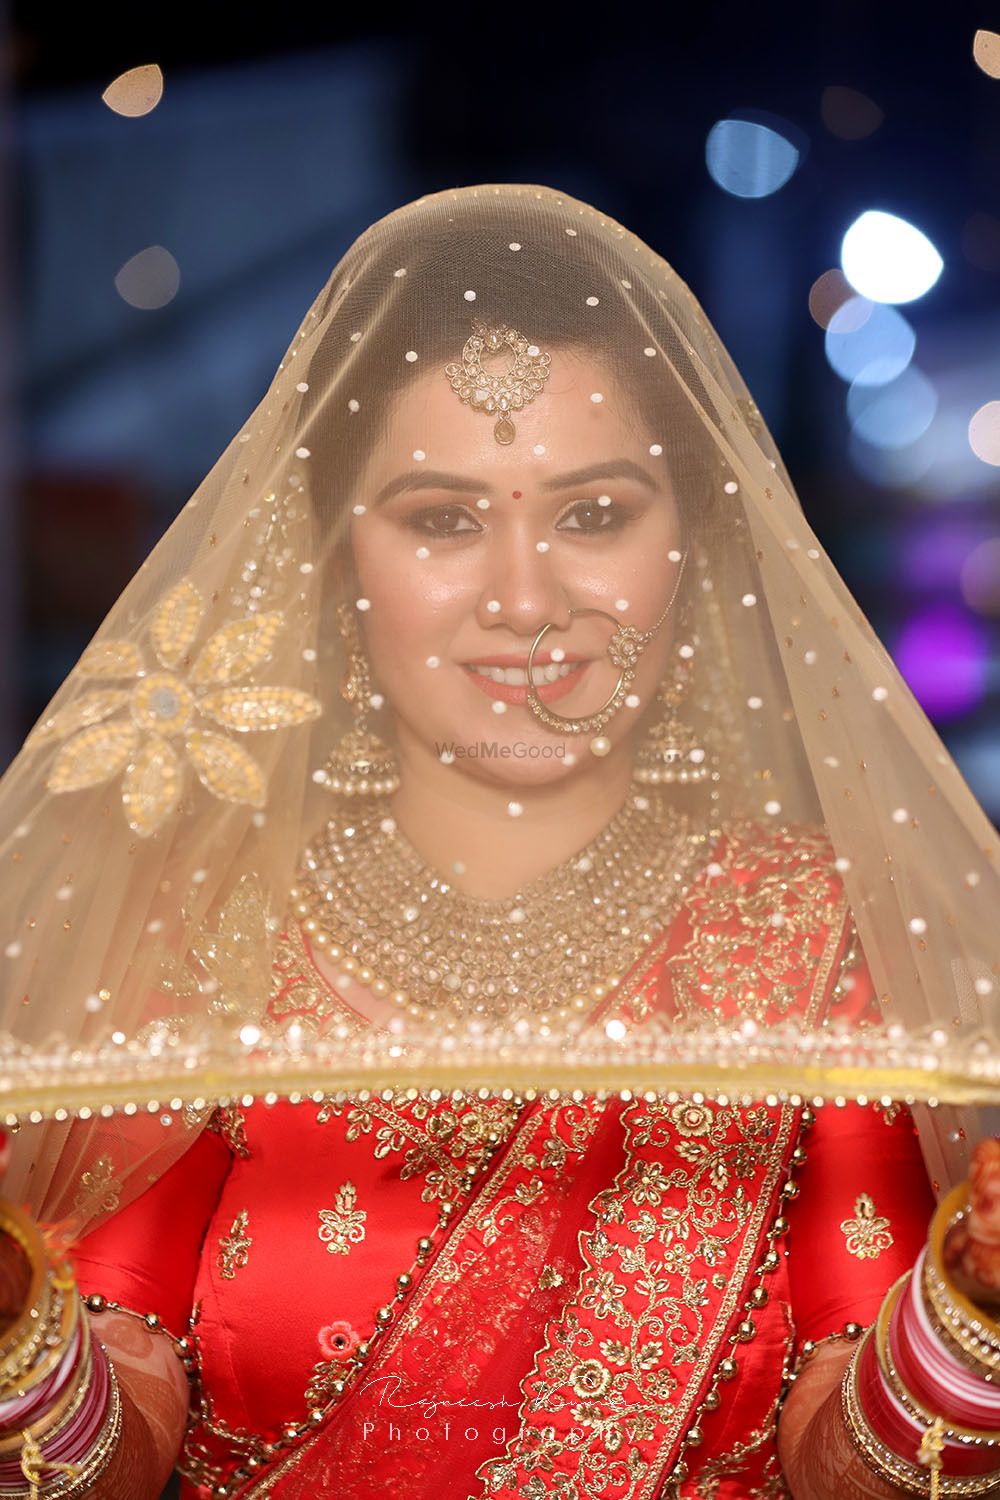 Photo From the BRIDES - By Rajneesh Photography